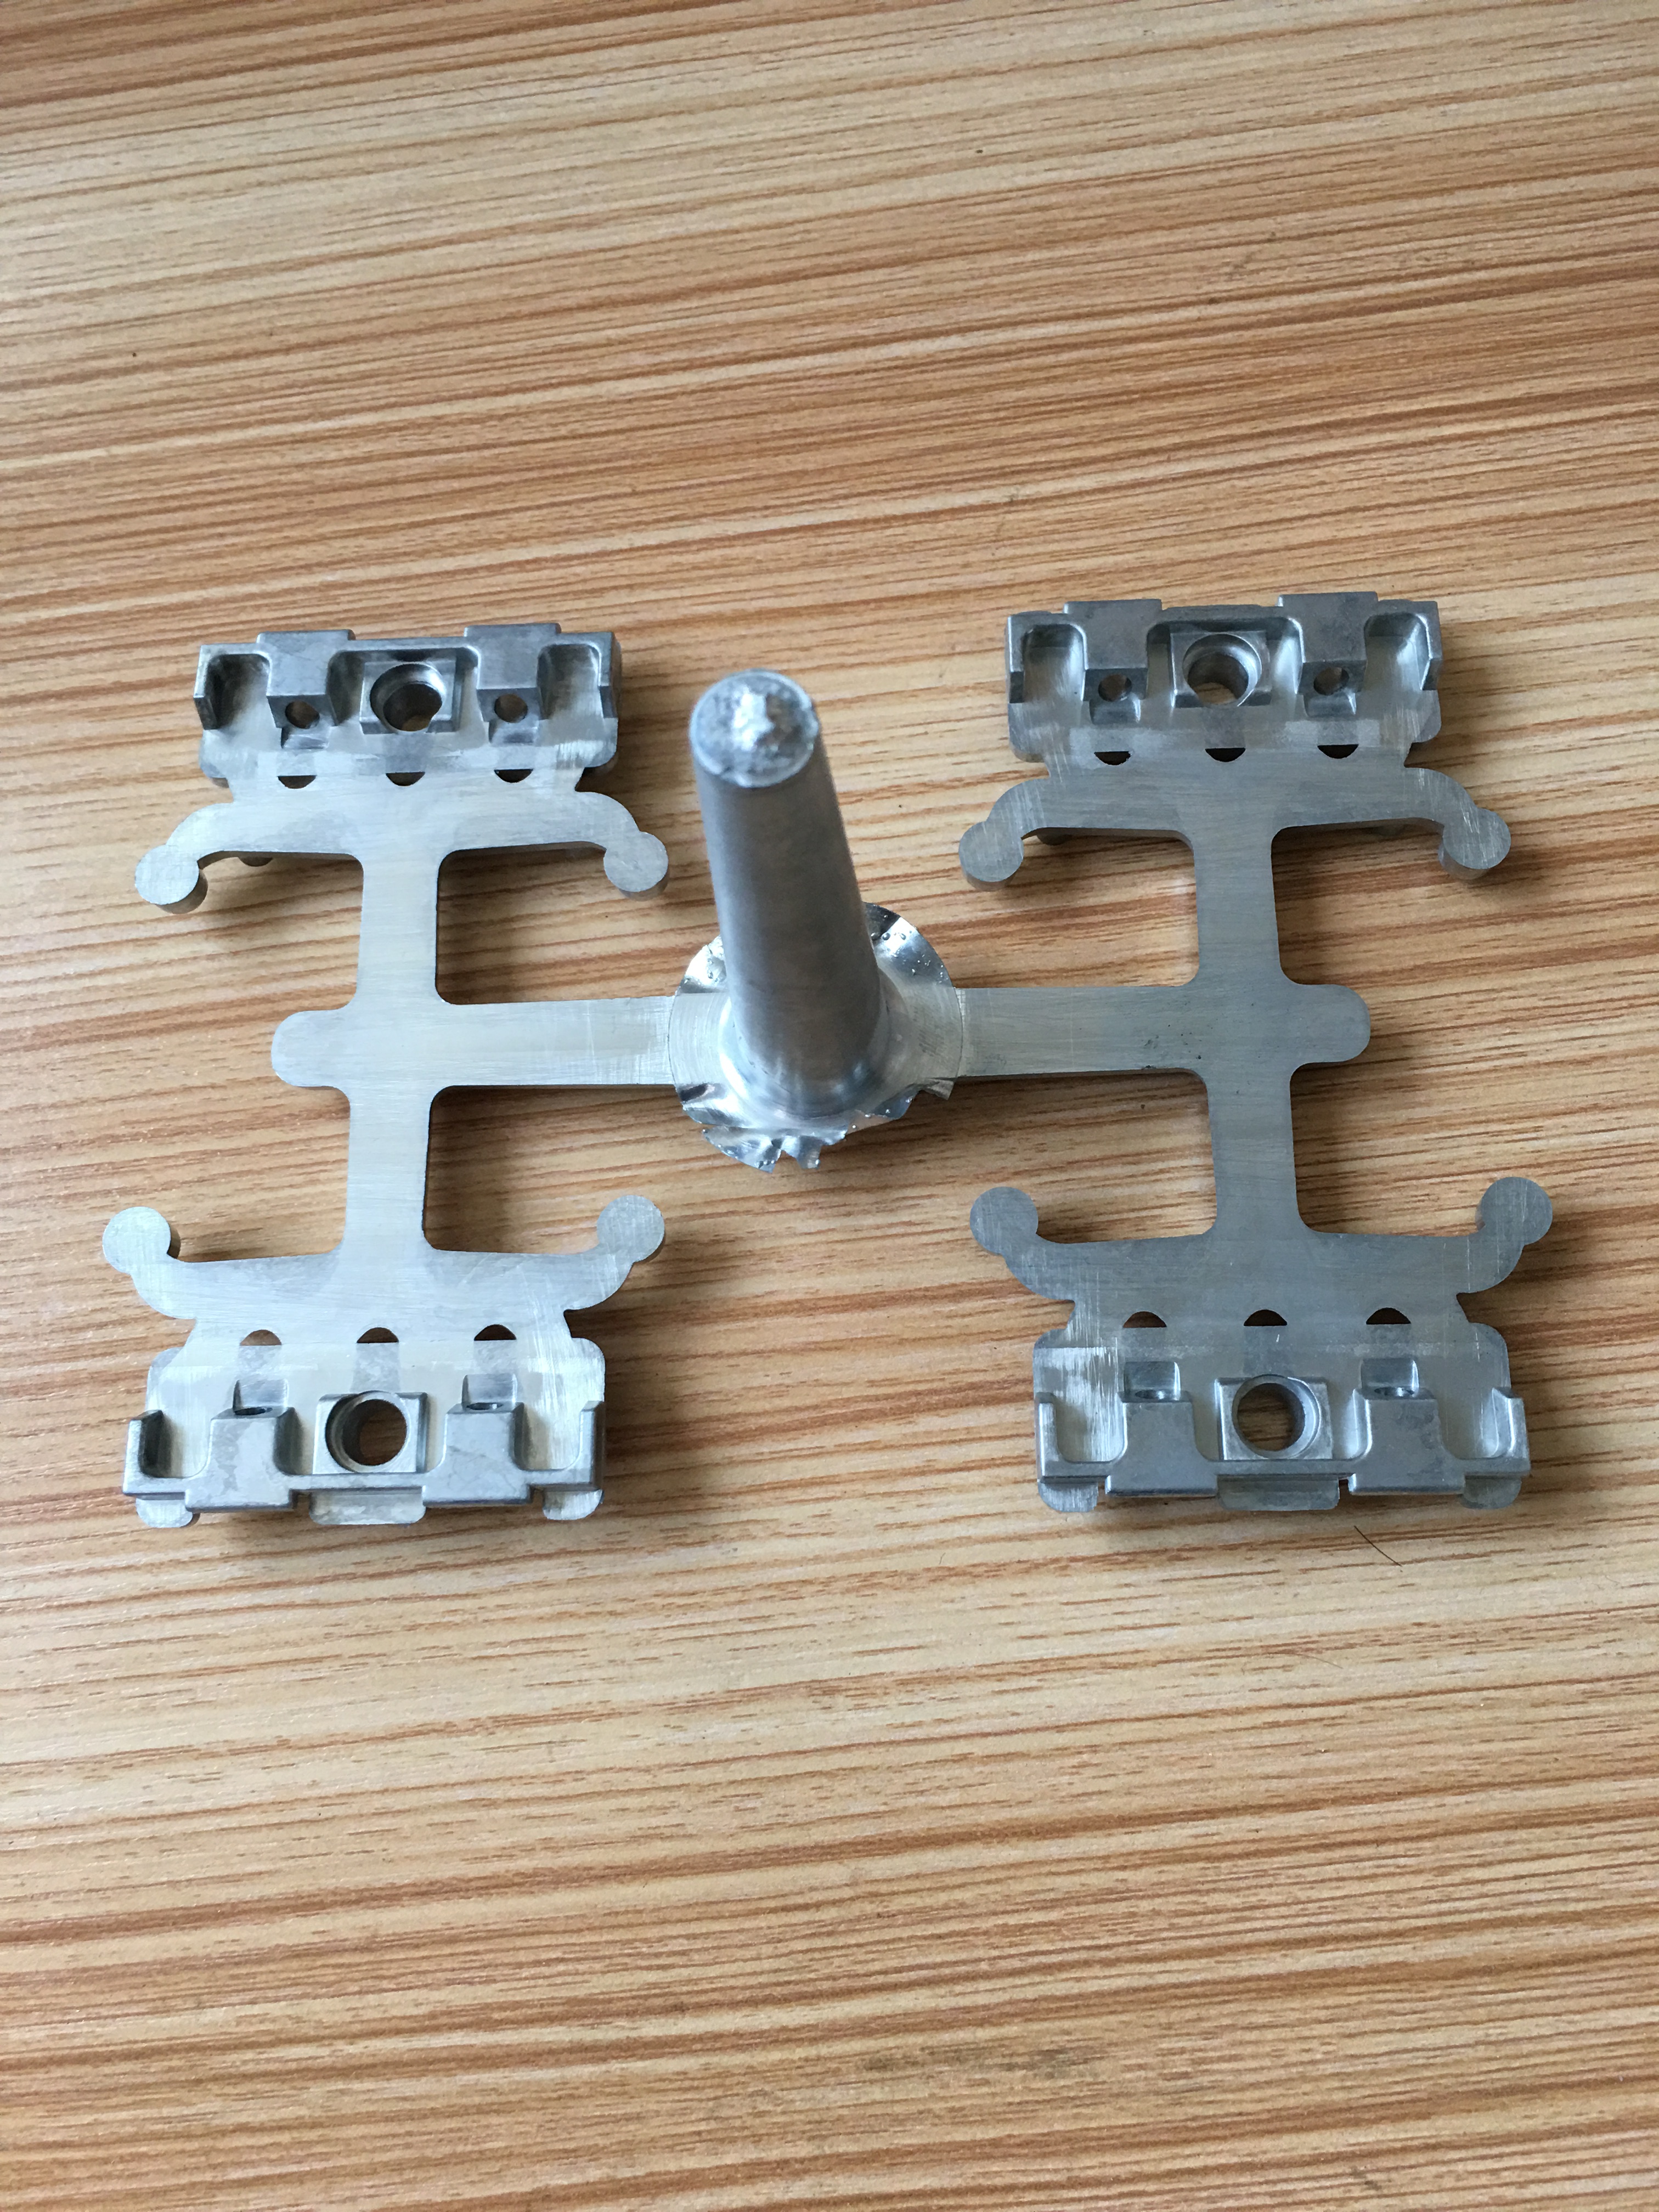 As a 3d printed injection mold tooling company,are there any maintenance requirements for the mold?